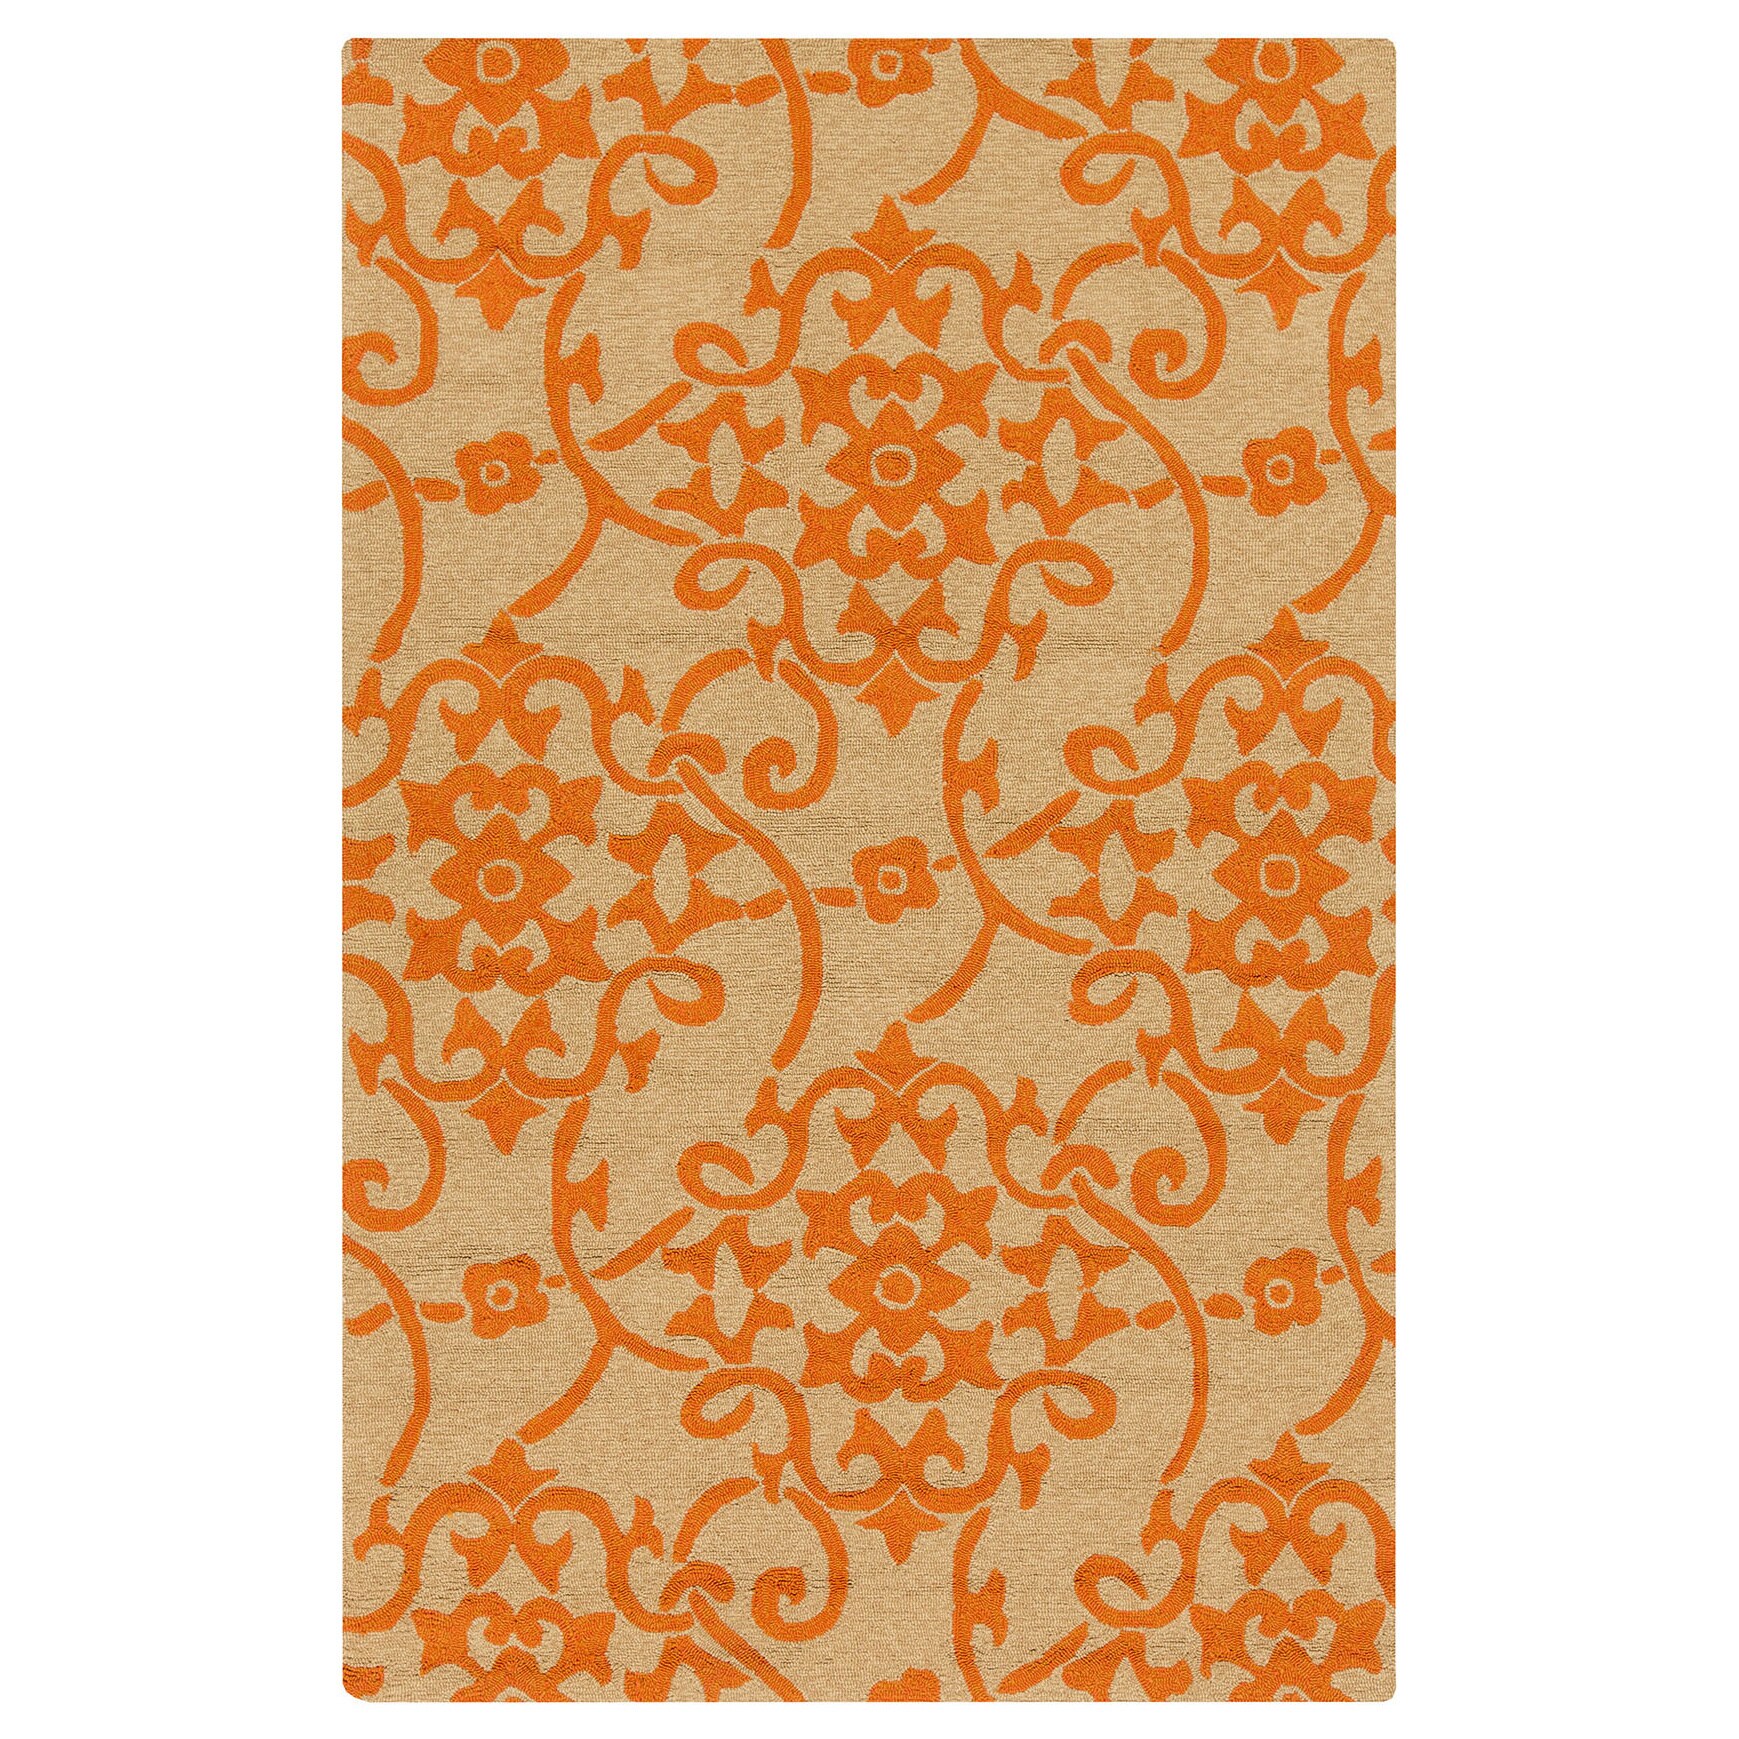 Hand hooked Kiera Transitional Floral Indoor/ Outdoor Area Rug (8 X 10)